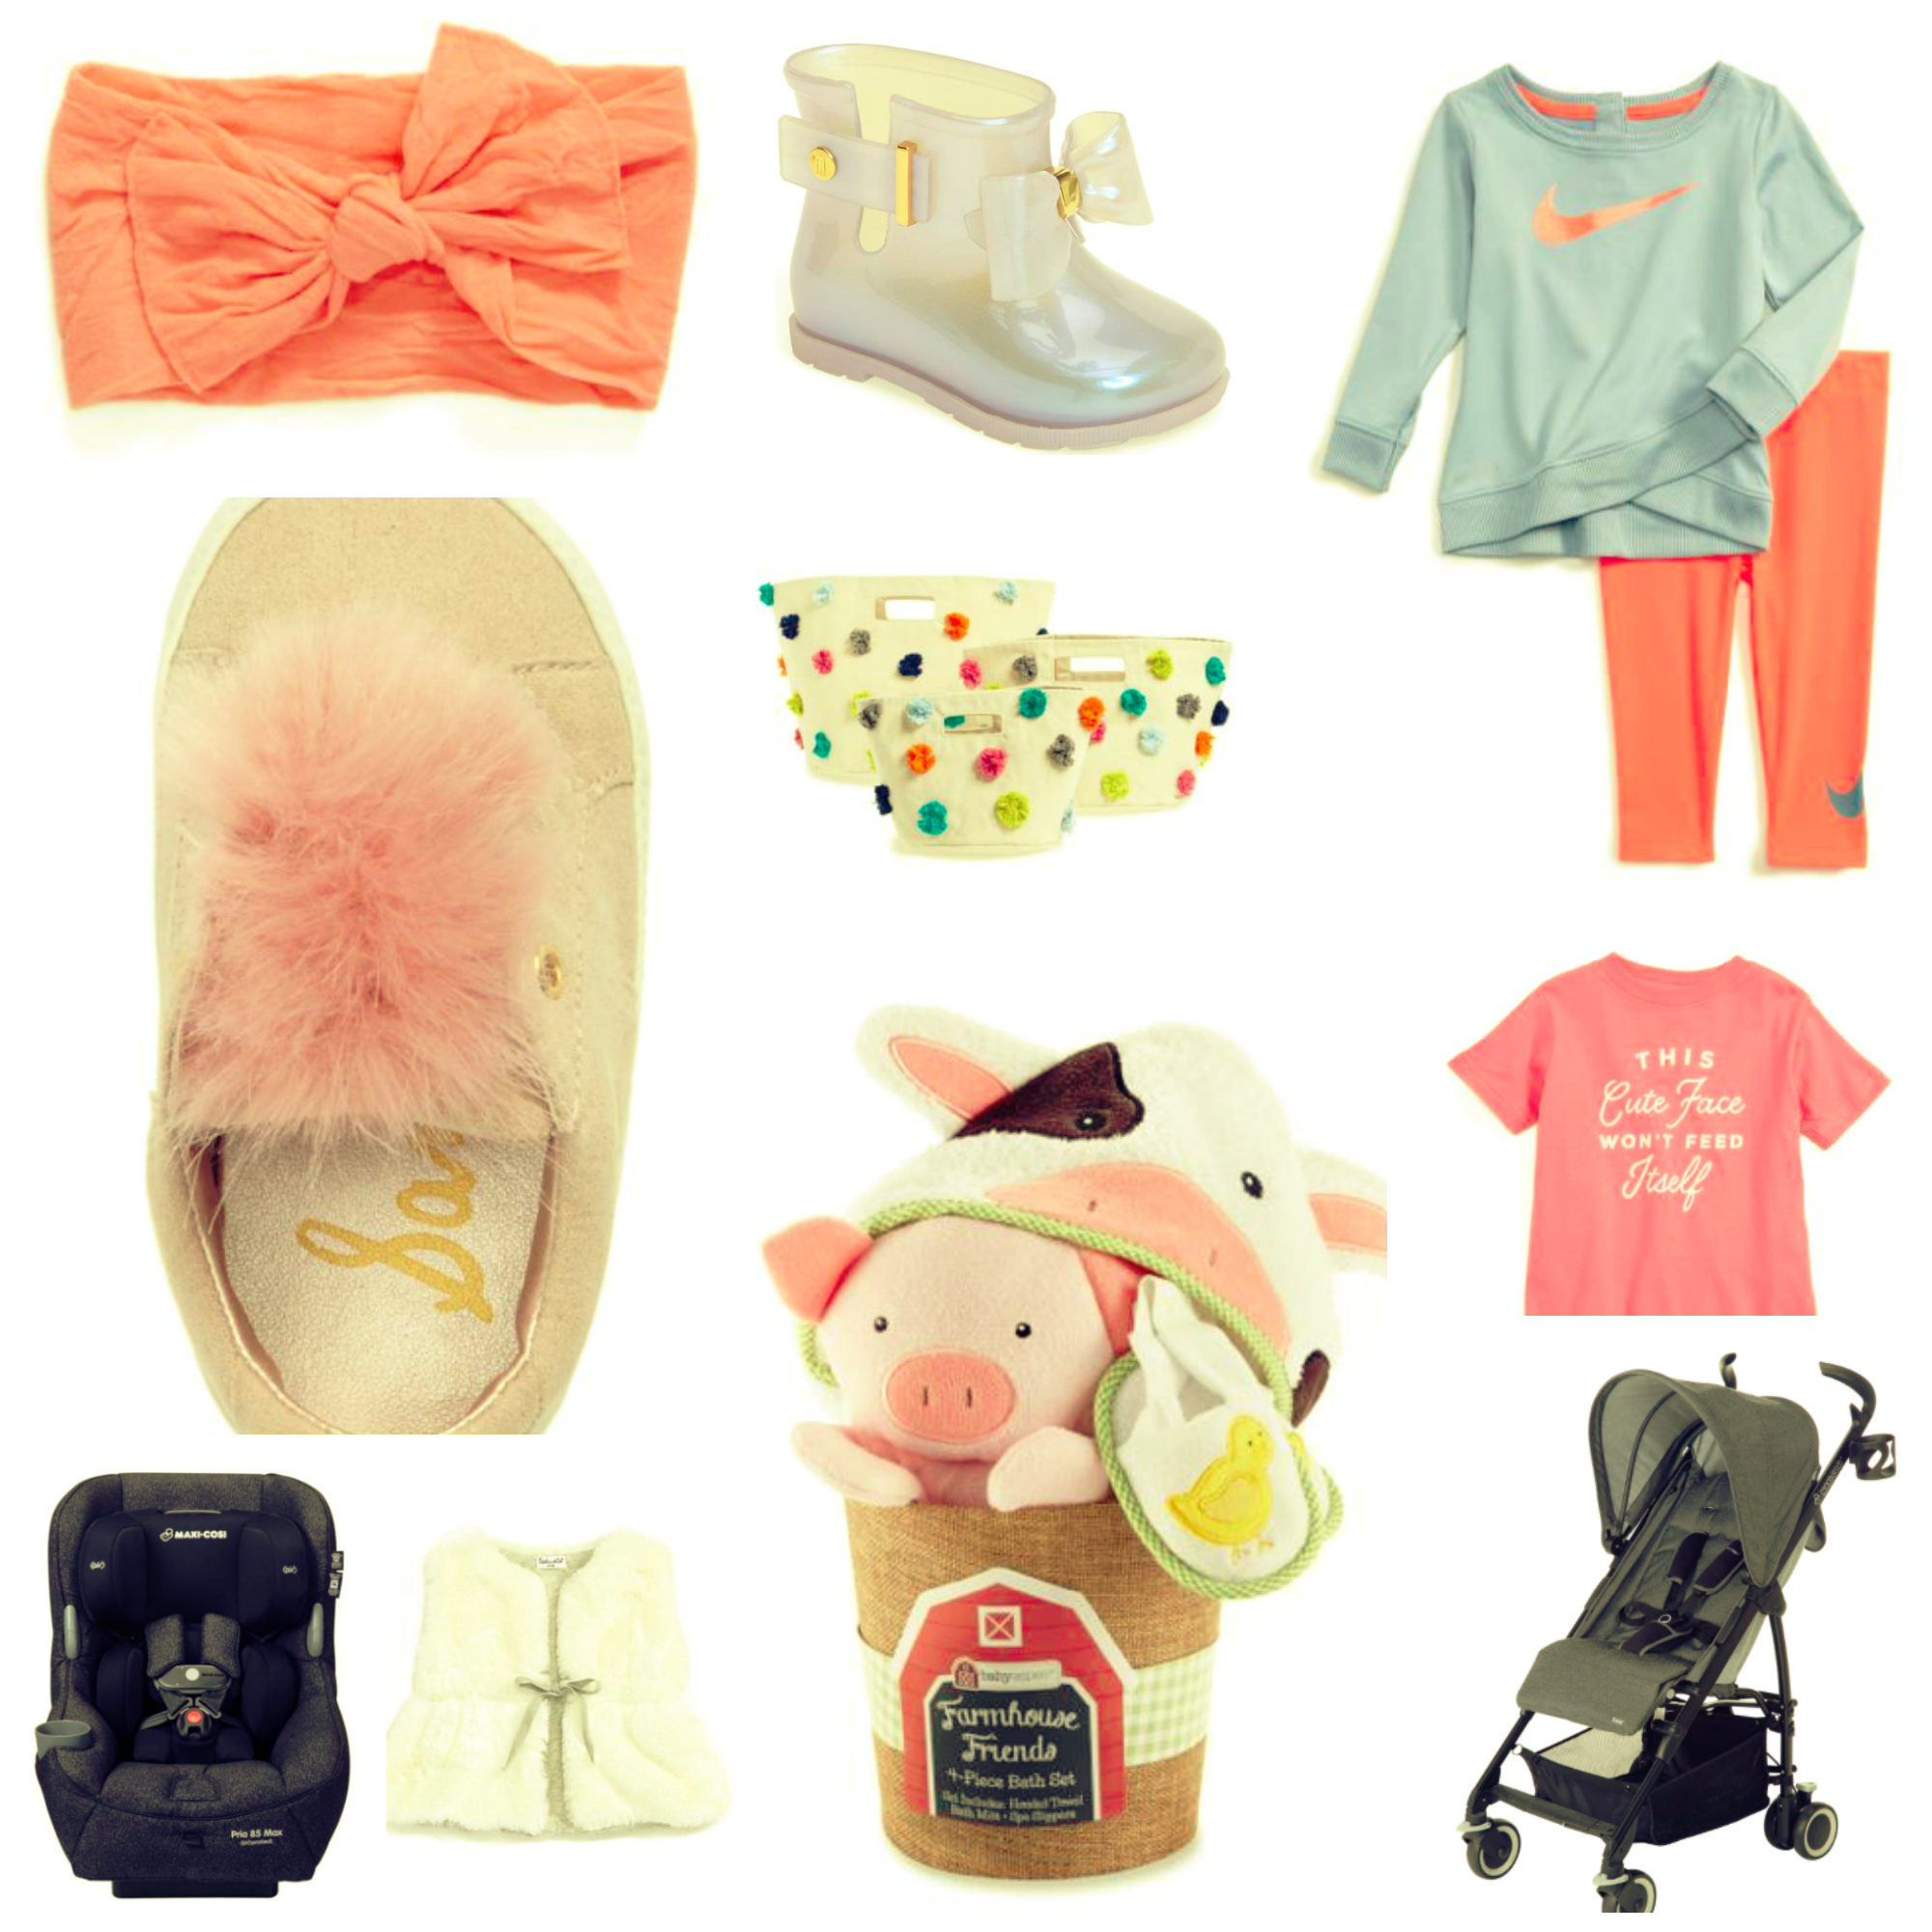 Nordstrom Sale Kids by Atlanta blogger Jessica of Happily Hughes